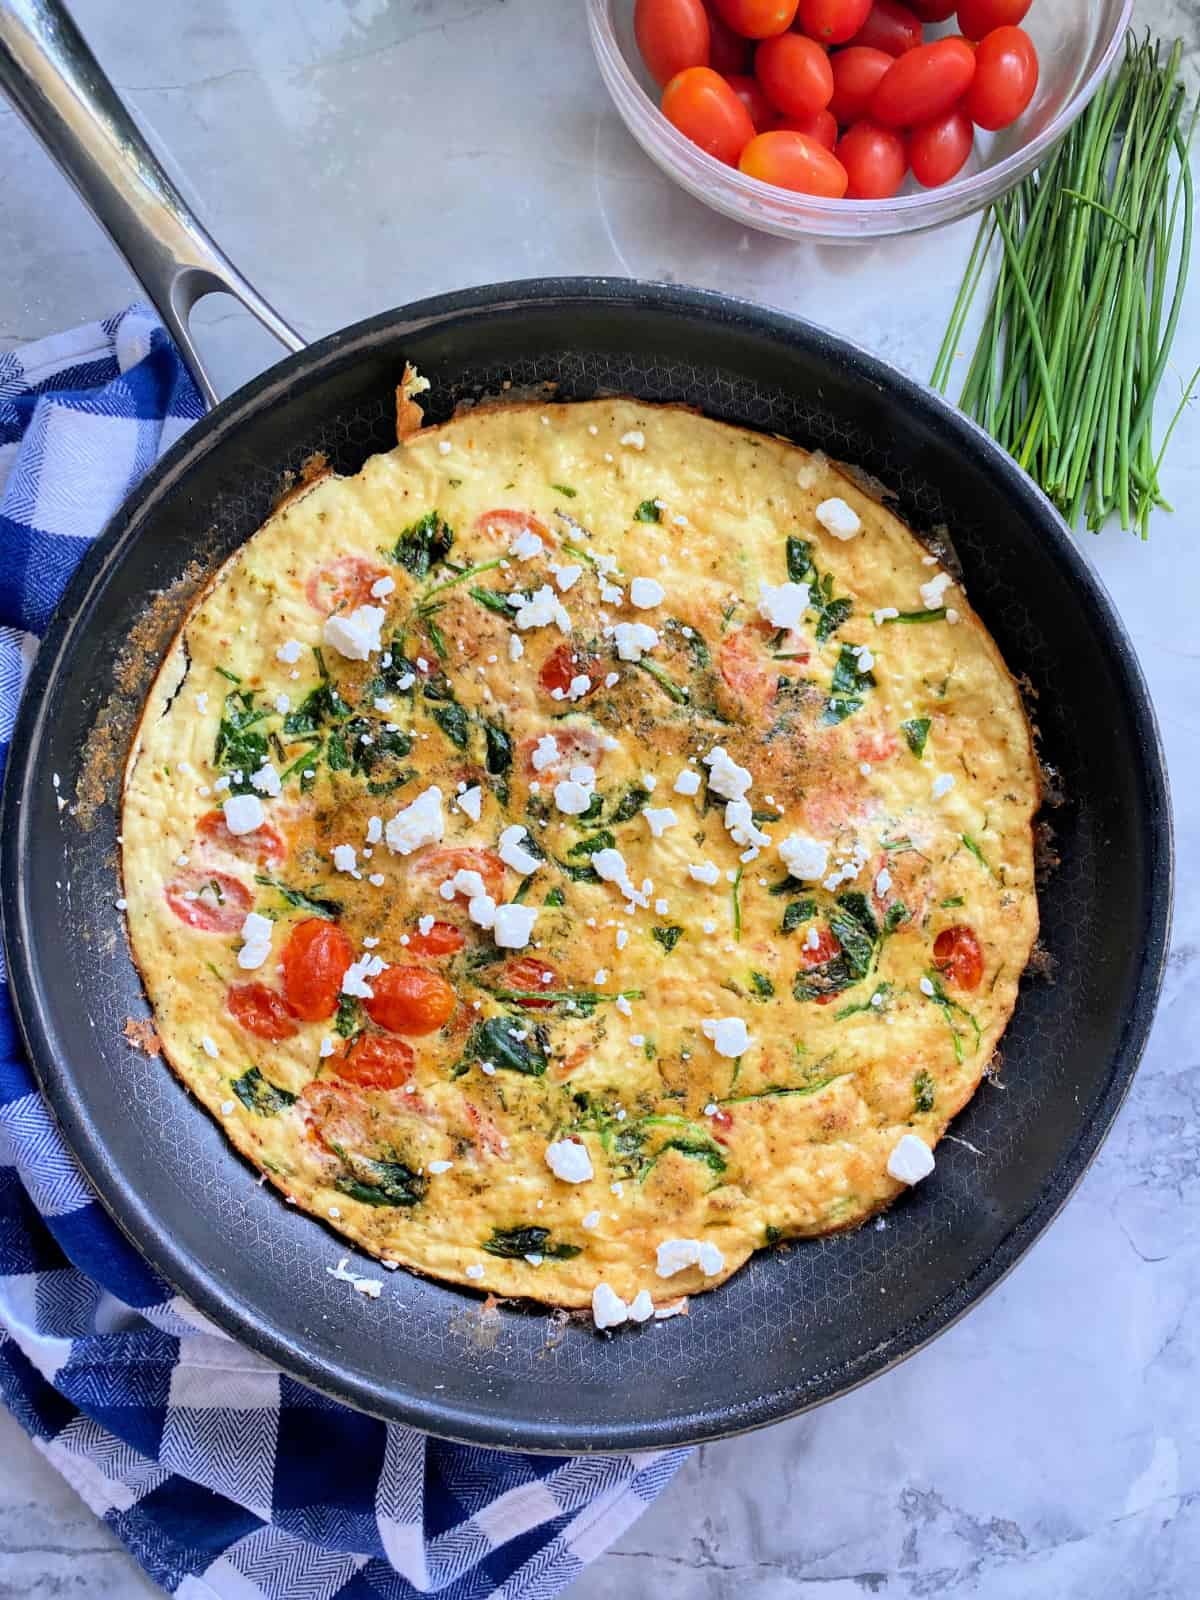 Black frying pan on a blue and white checkered cloth with an egg fritatta in the pan.